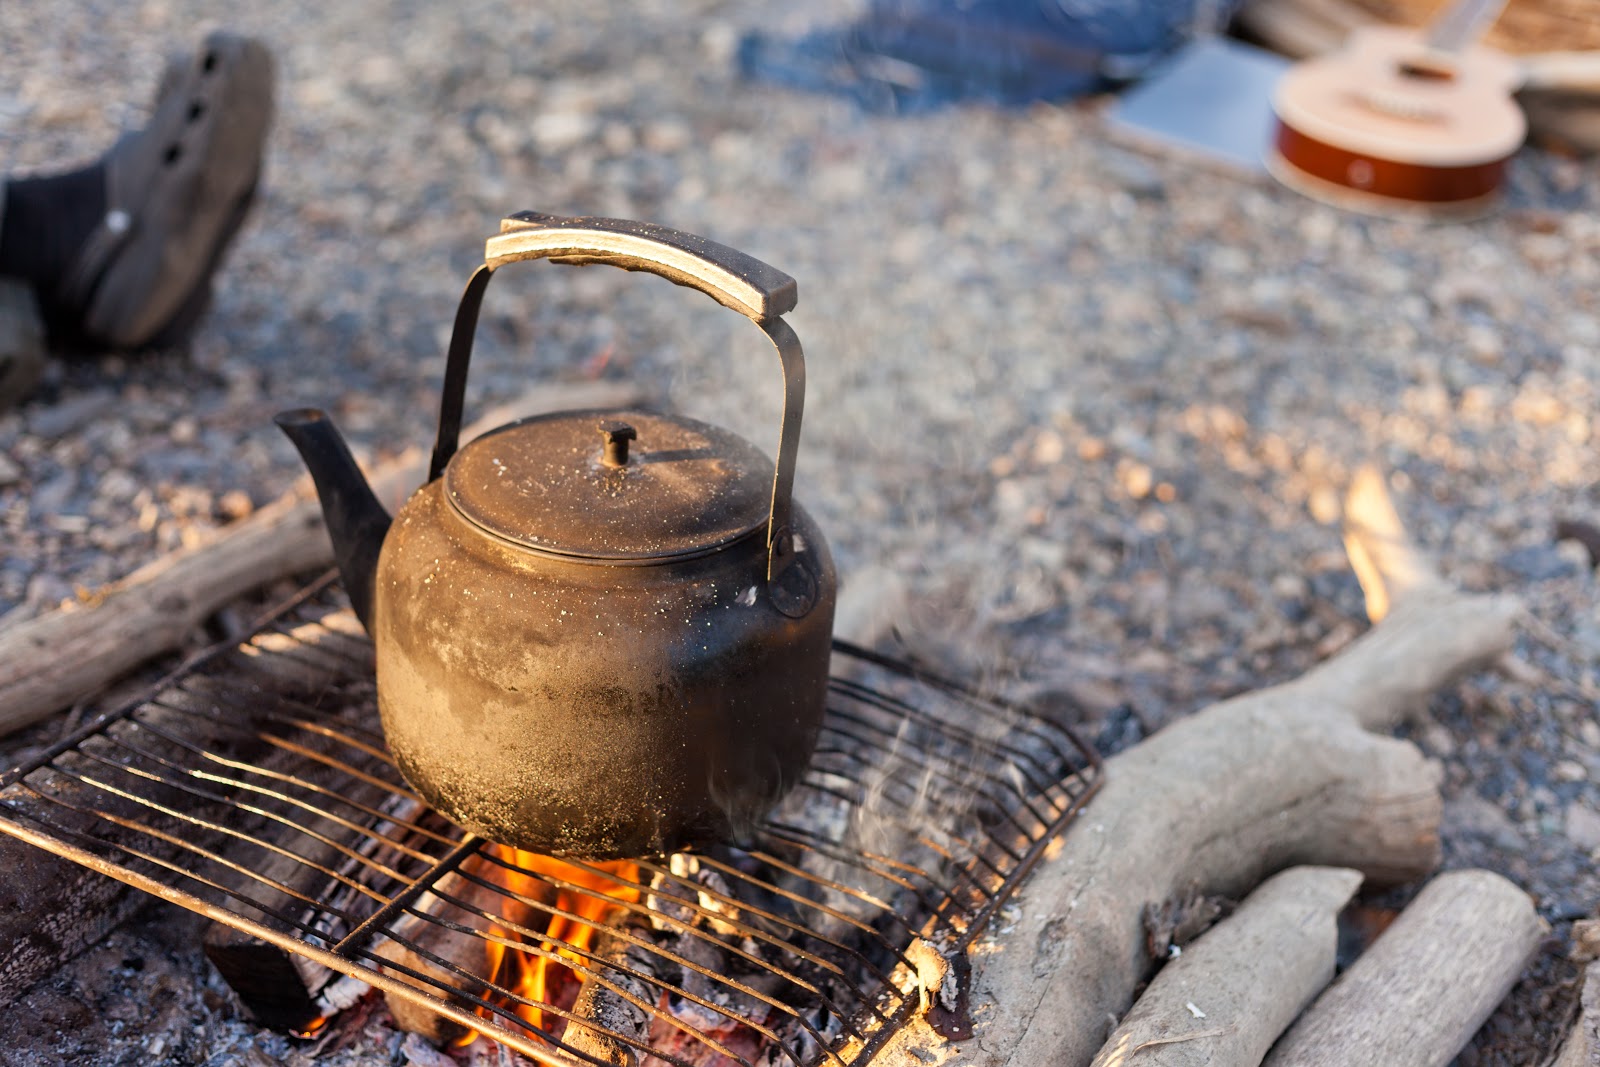 How to Make Coffee - Camping Edition